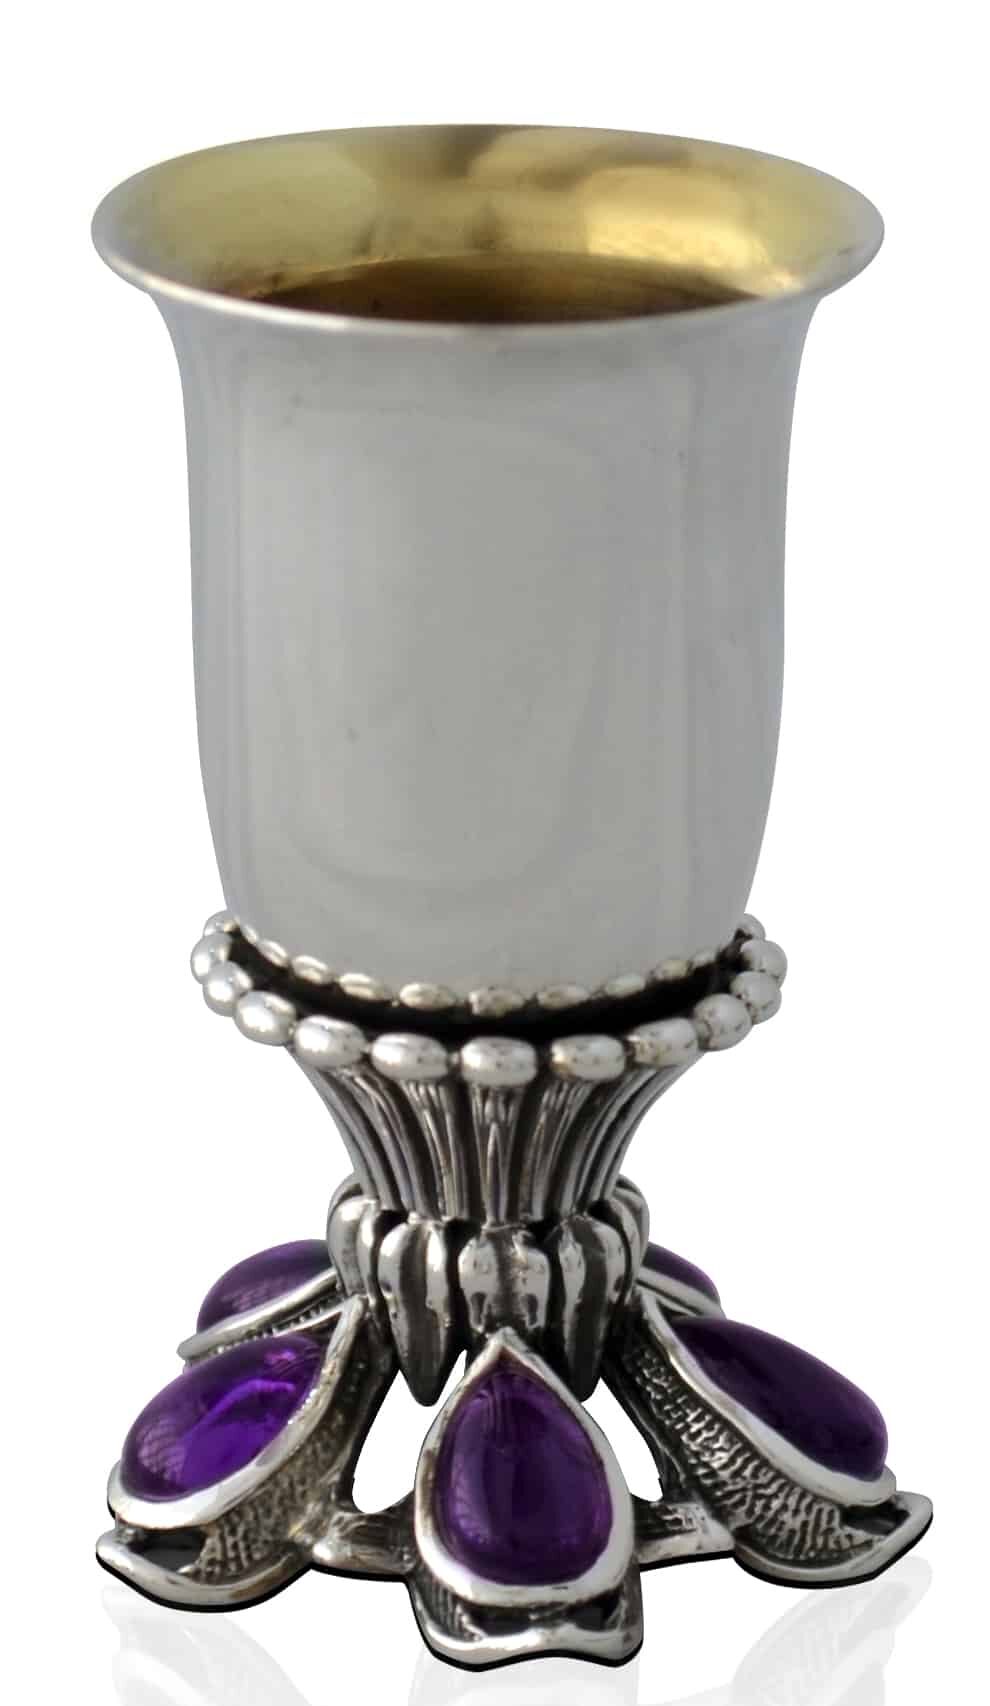 Small Children’s cup with Amethyst Stones